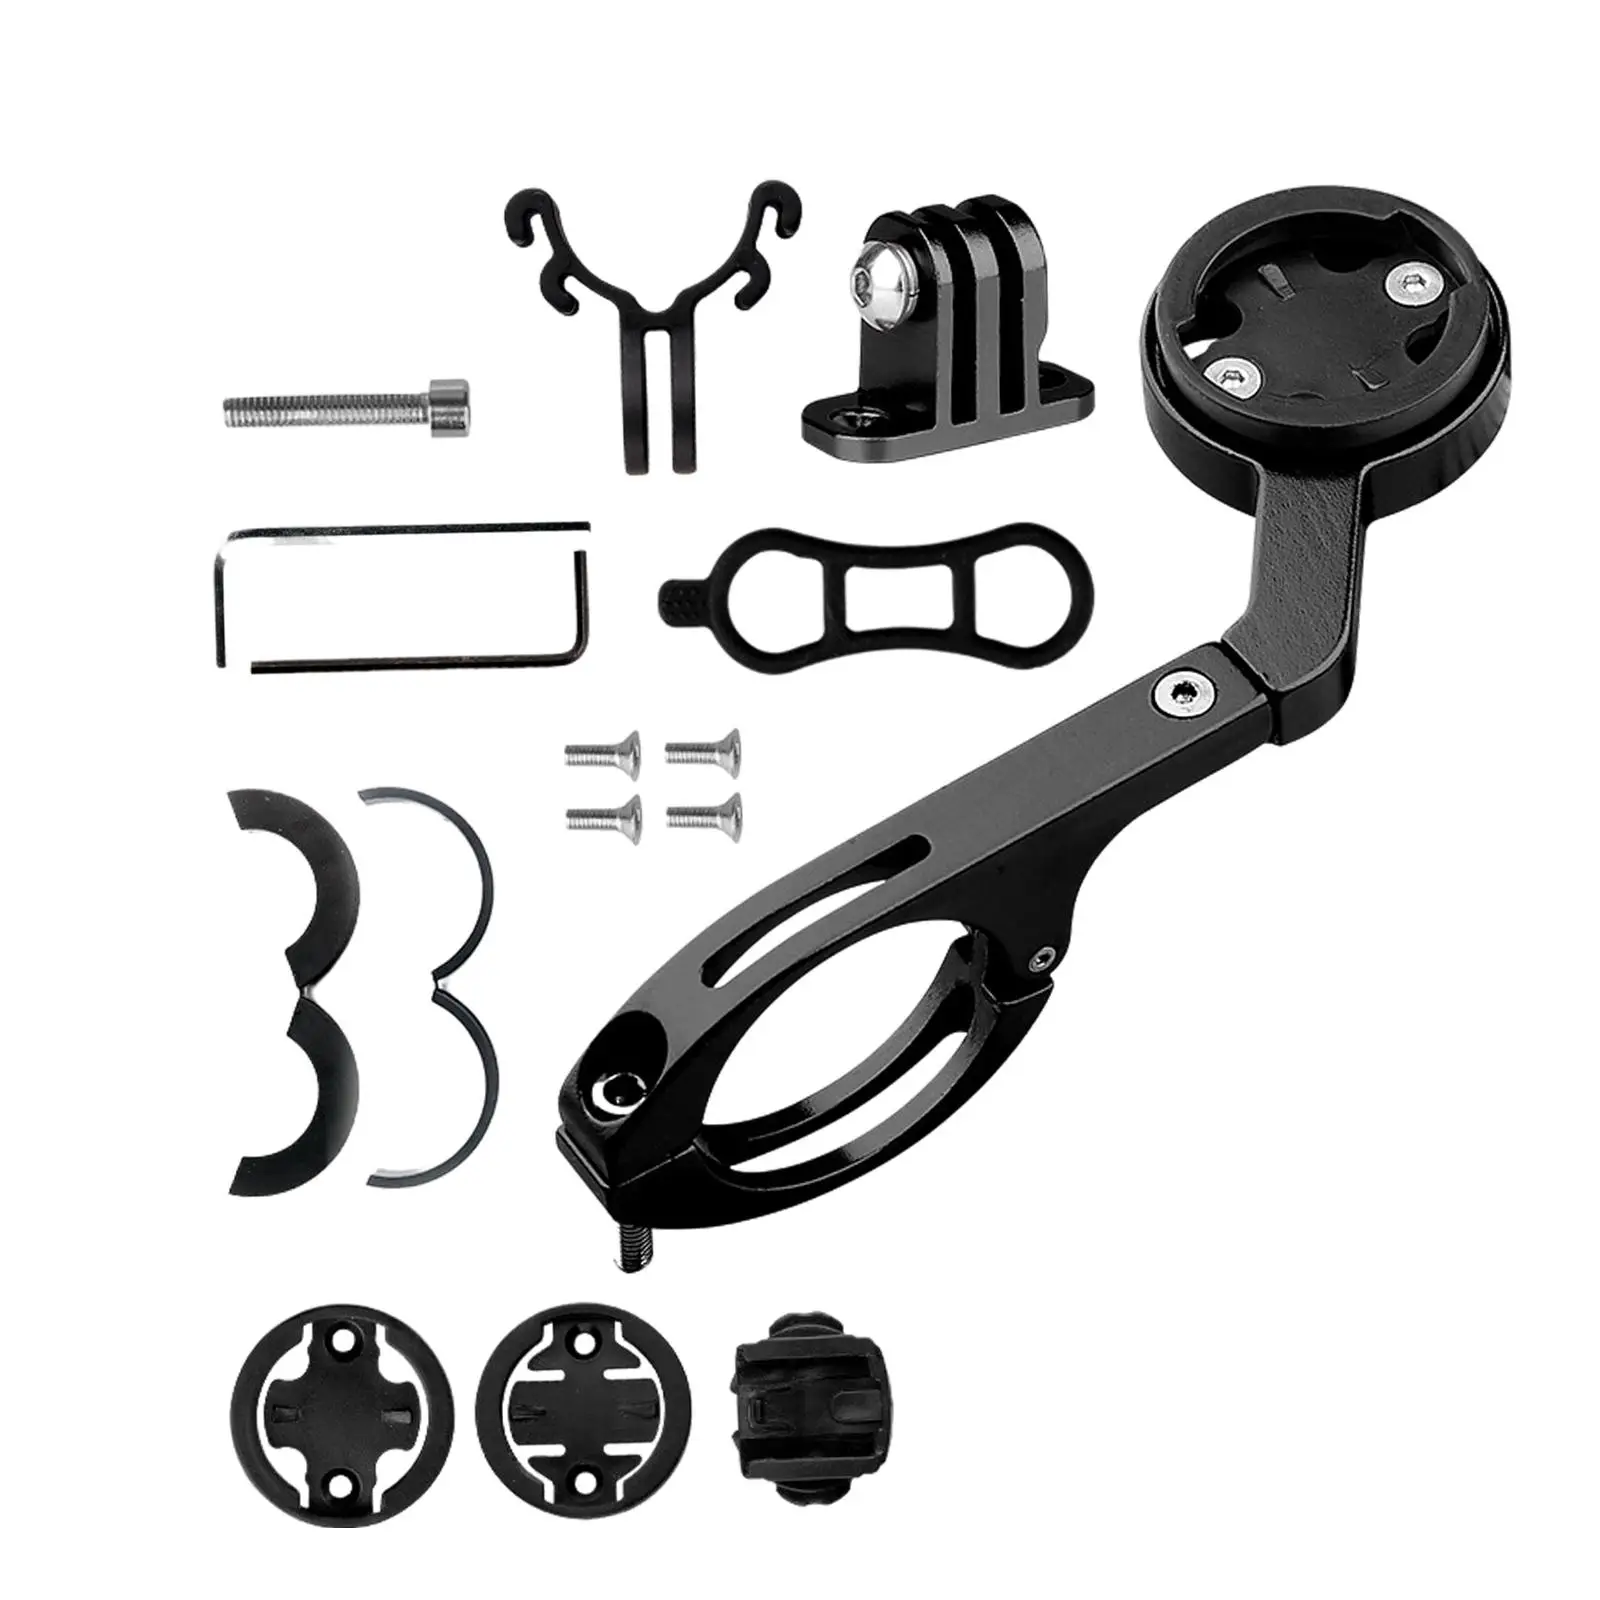 Cycling Bike Computer GPS  Mount Holder for Bike Computer camera for , Mountain Bike Road Bike Handlebar Extended Combo Mount